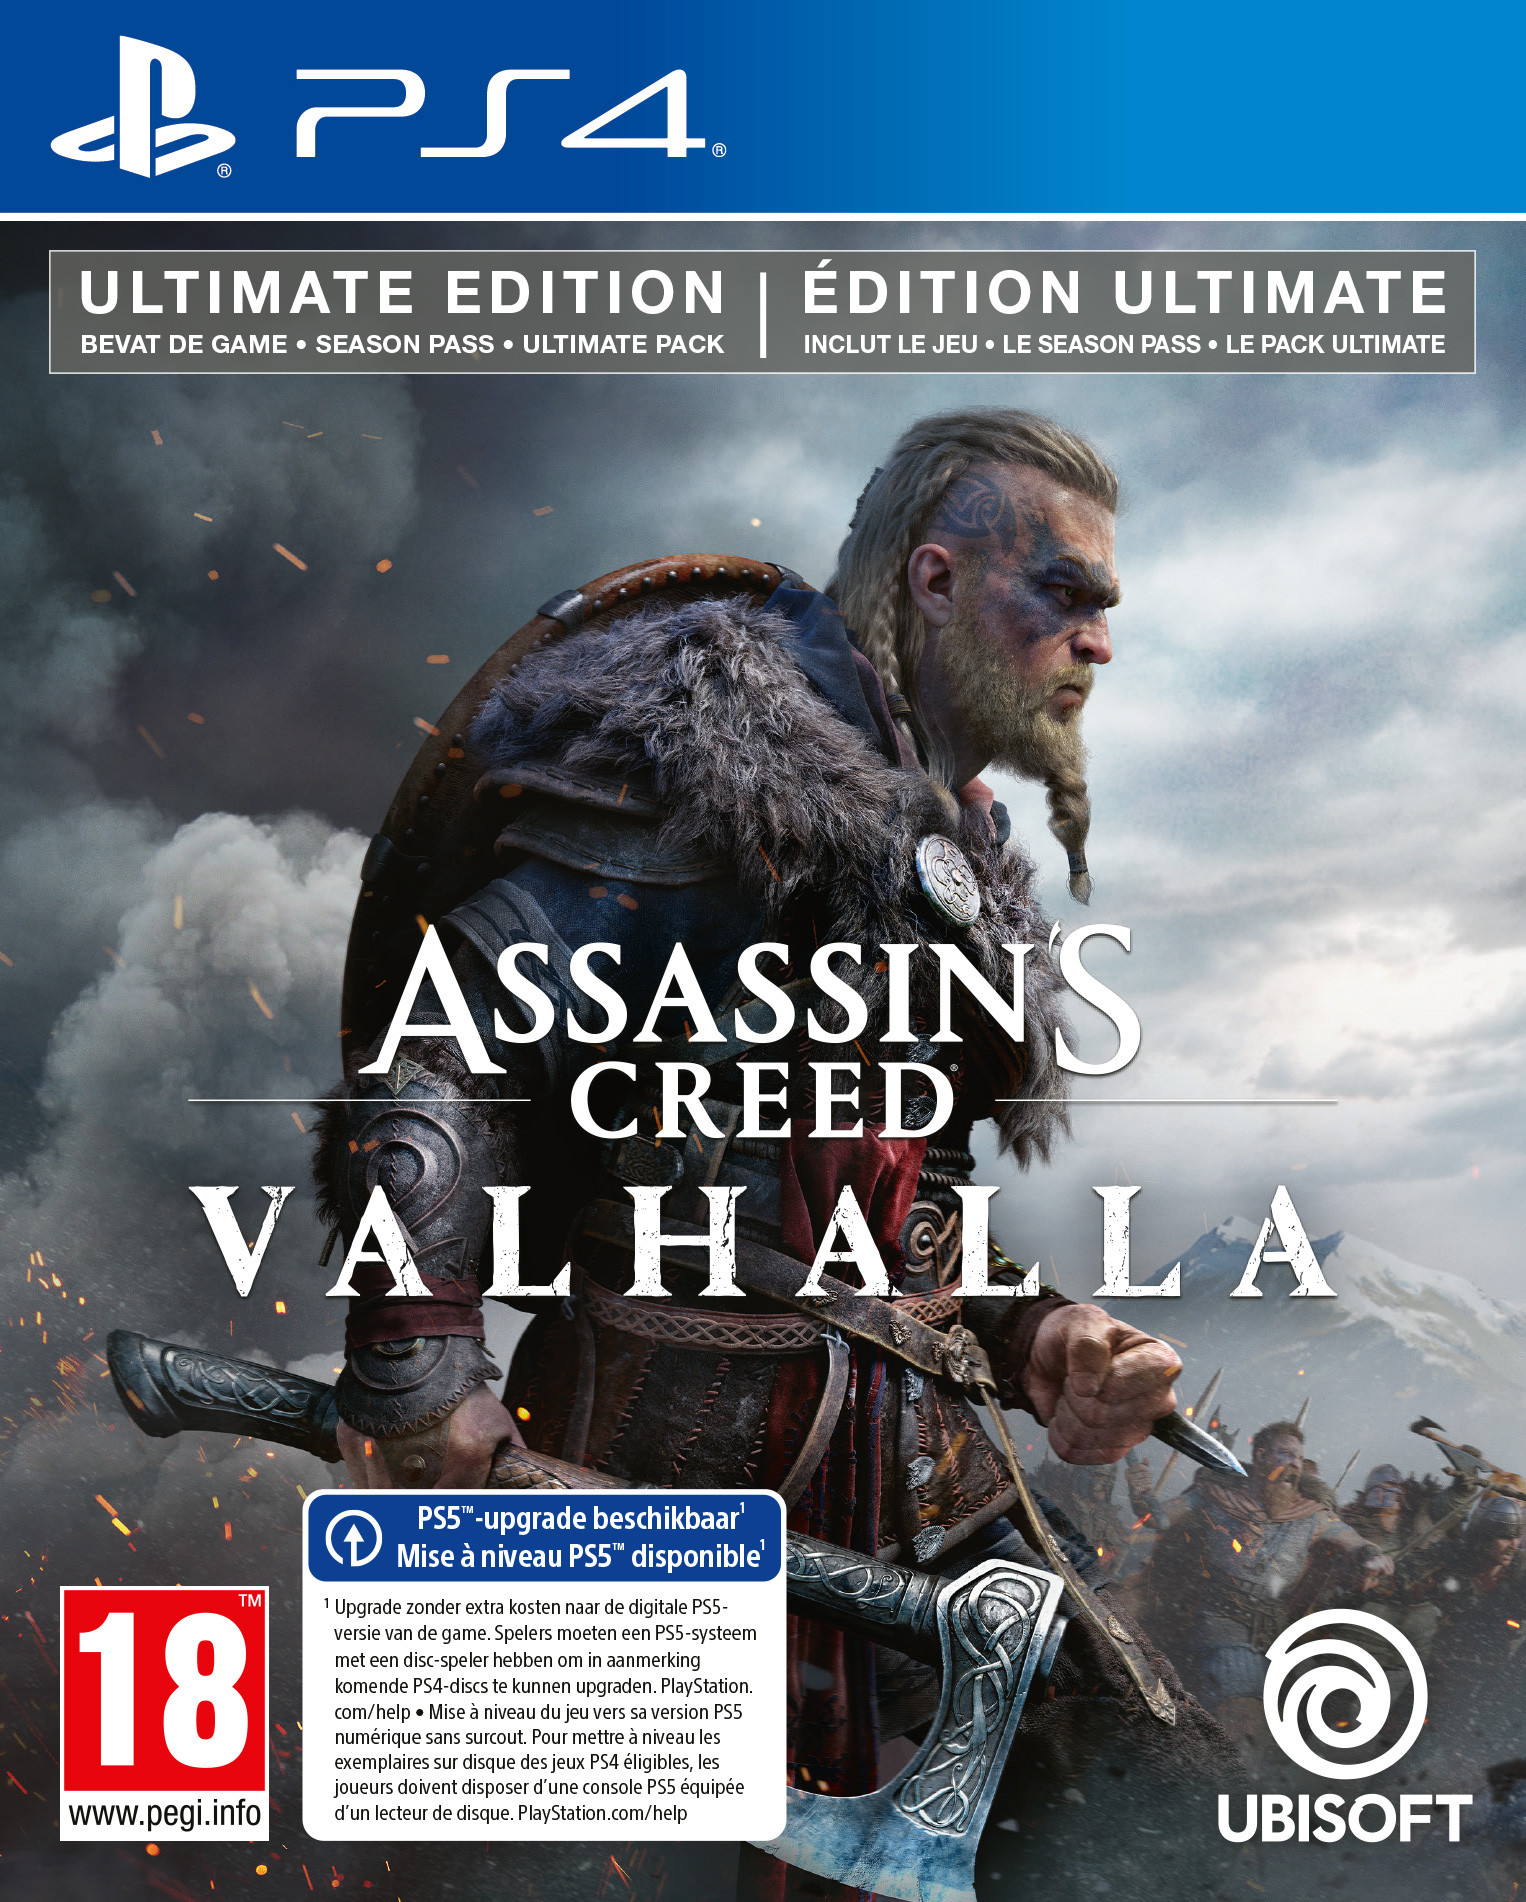 Assassin's Creed Valhalla Ultimate Edition met grote korting